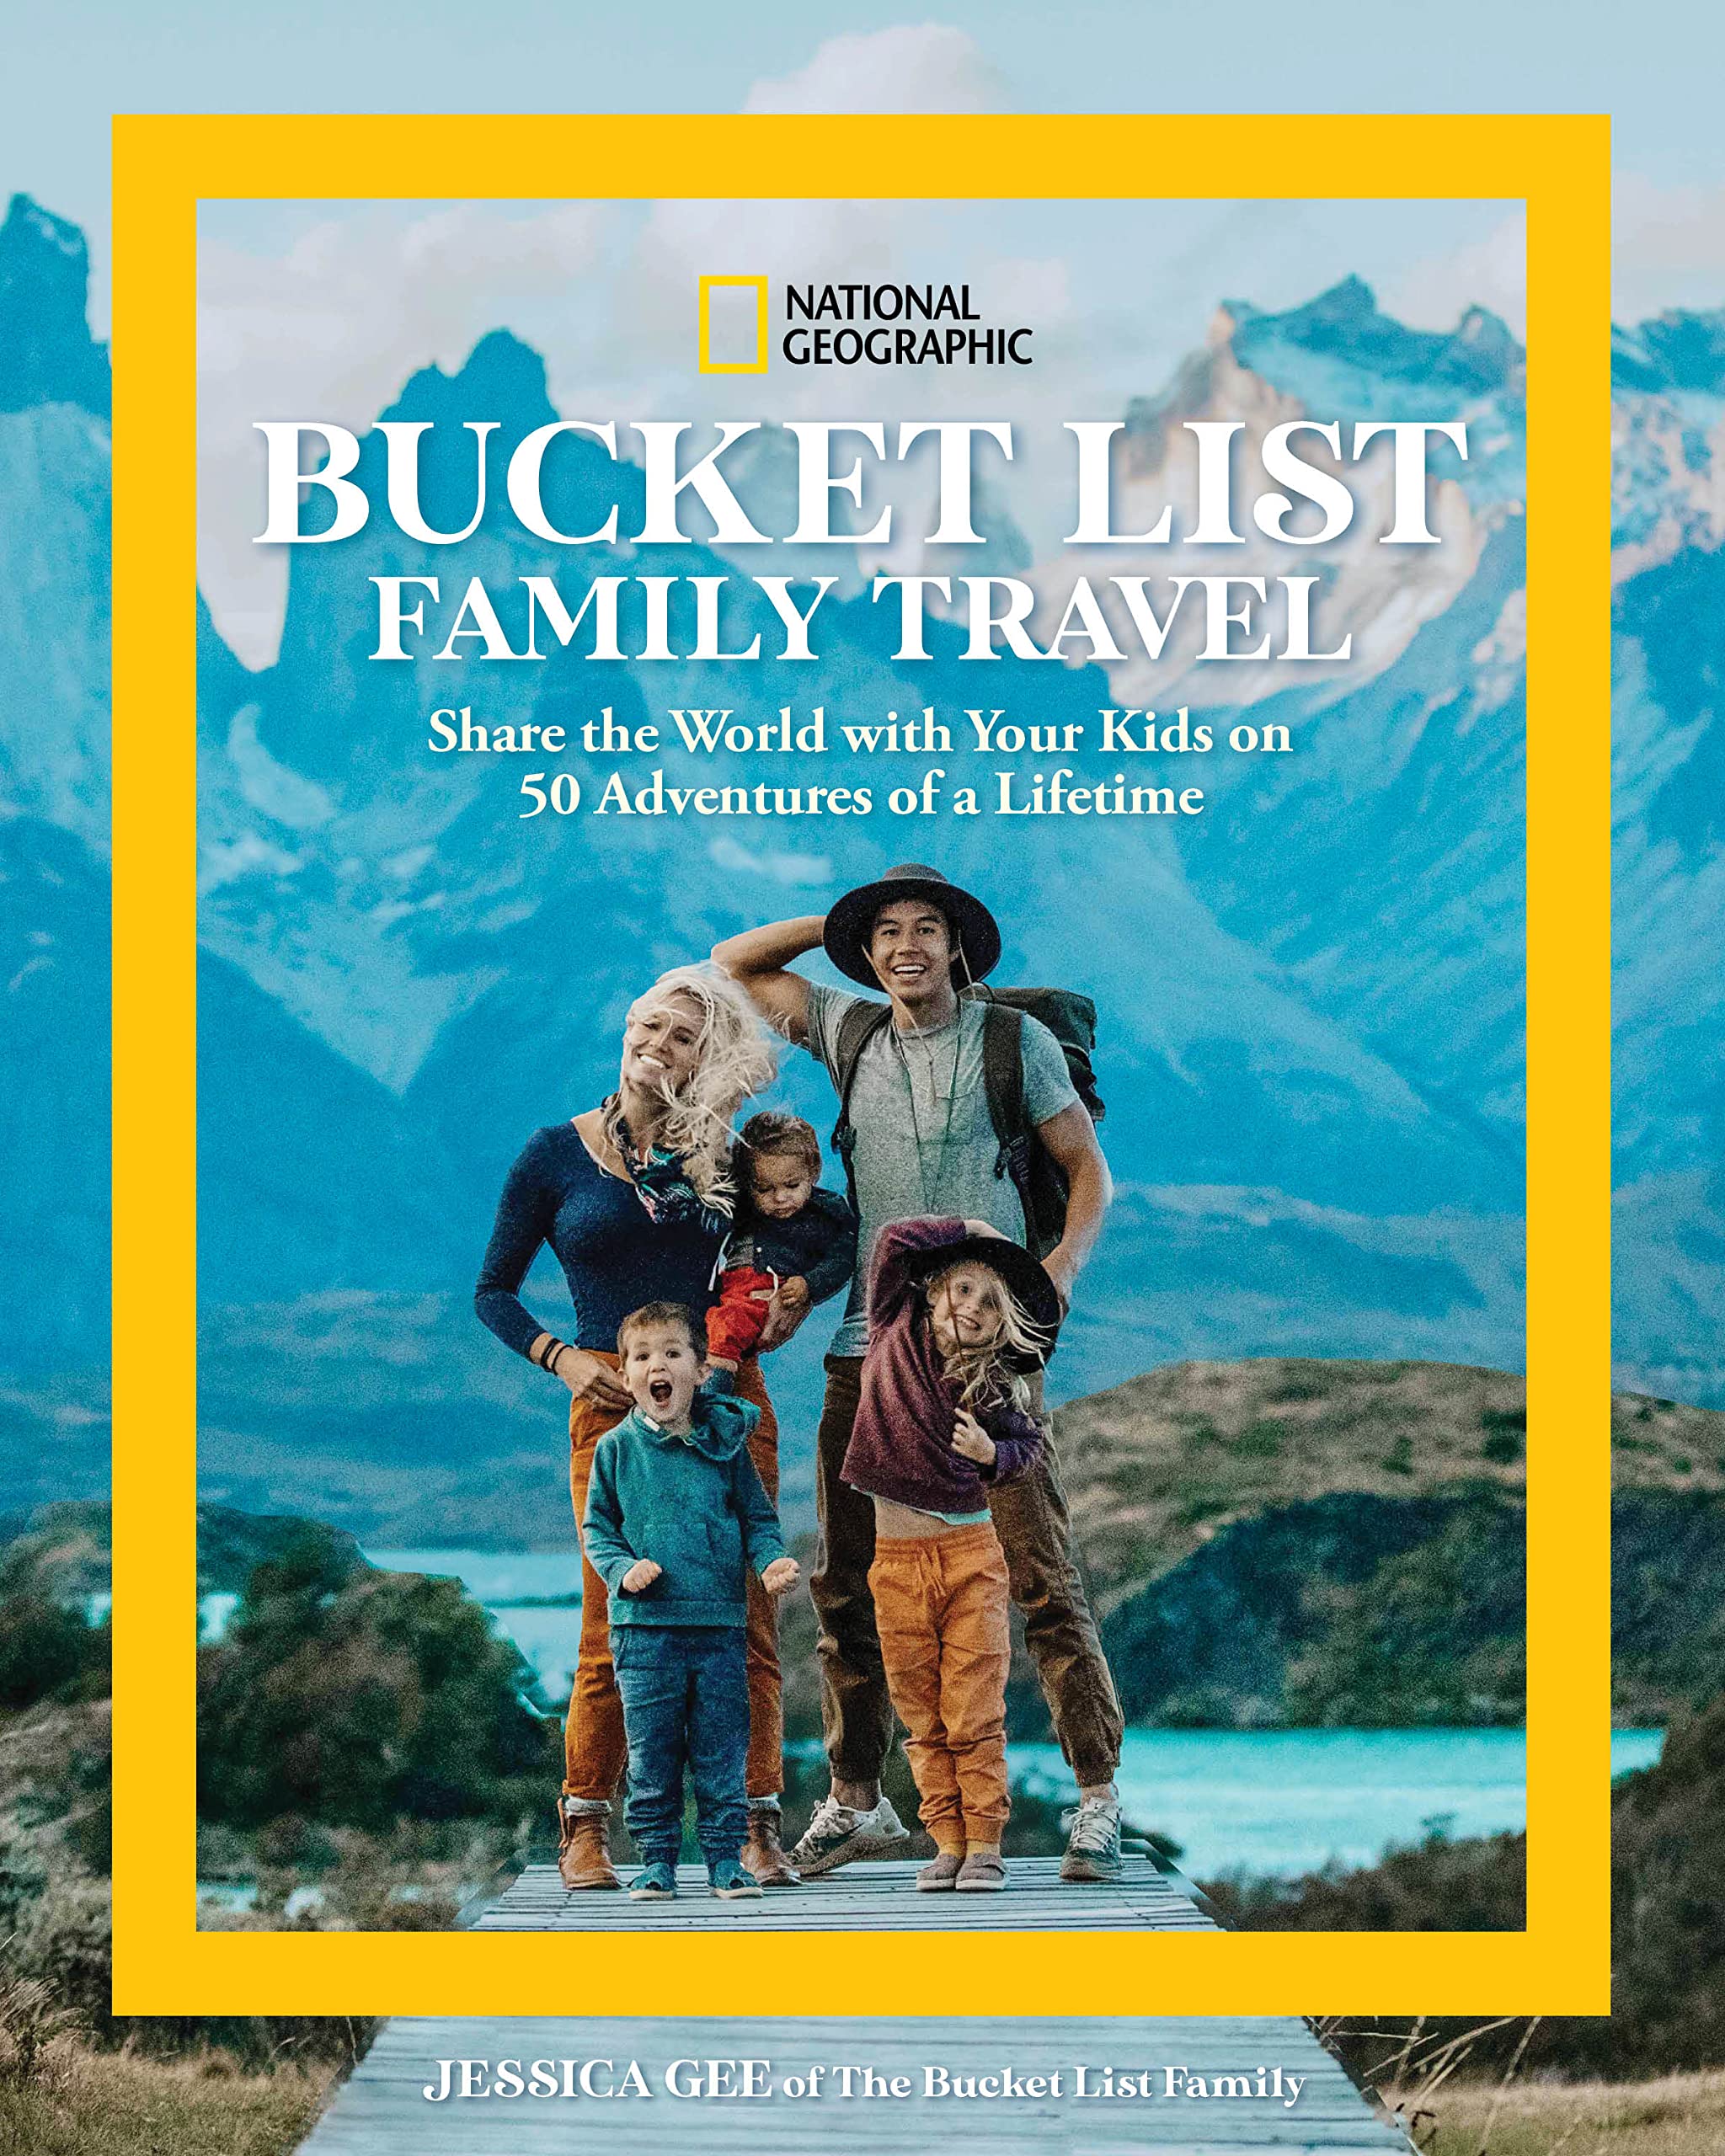 Share　the　National　National　with　Your　Family　Geographic　a　Travel　50　Adventures　of　Lifetime　Bucket　Geographic　List　Geographic,　Books　Travel　Kids　by　World　on　National